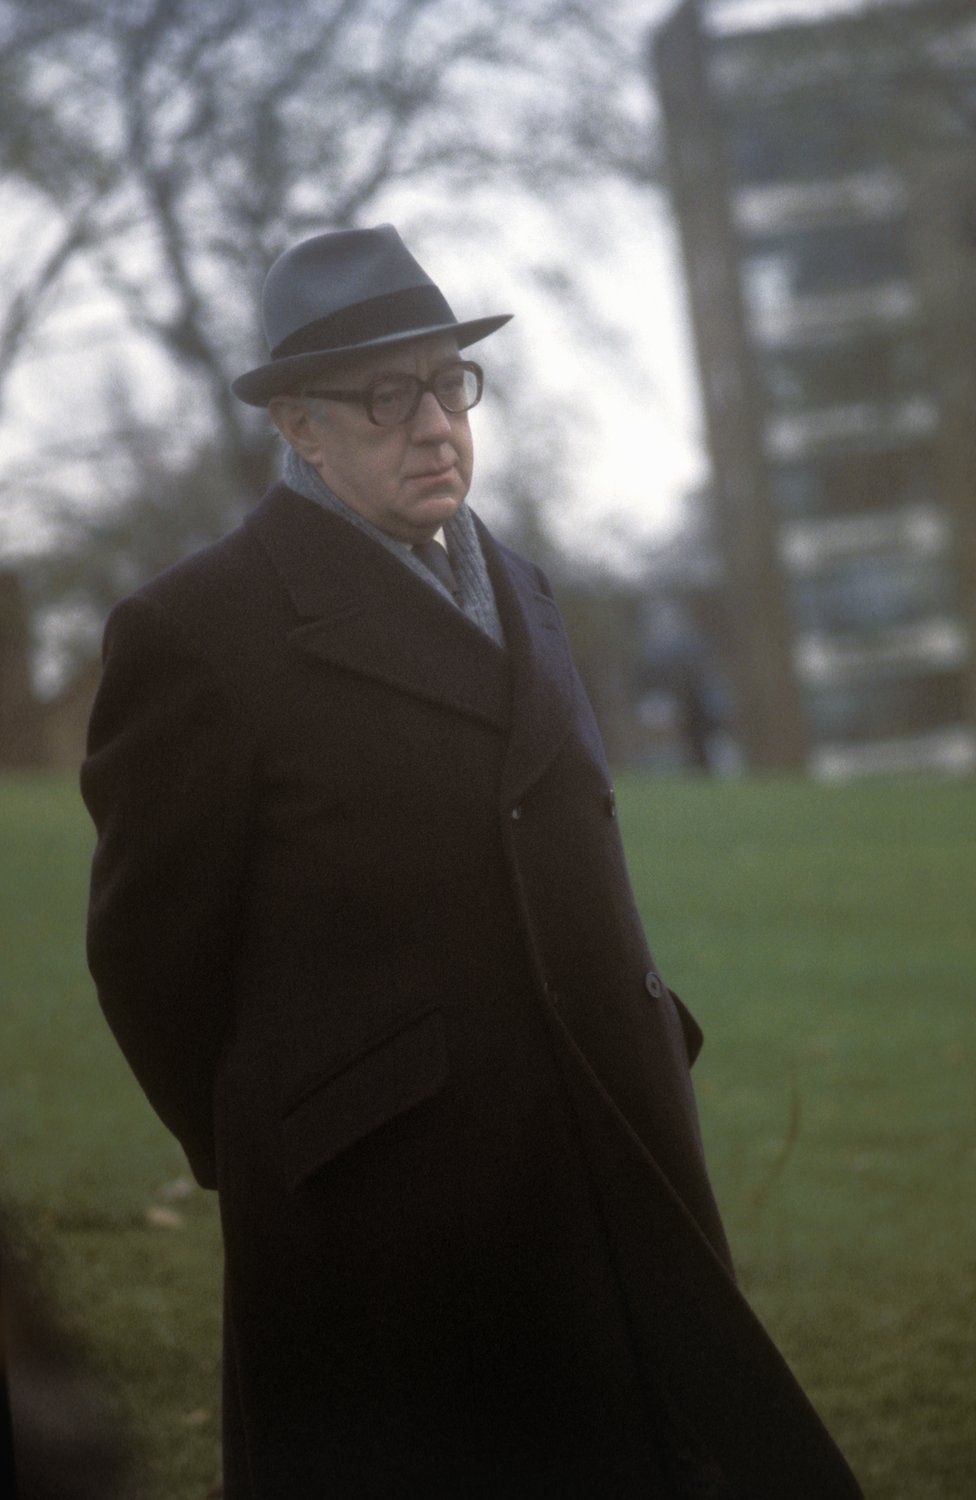 Alec Guinness as George Smiley